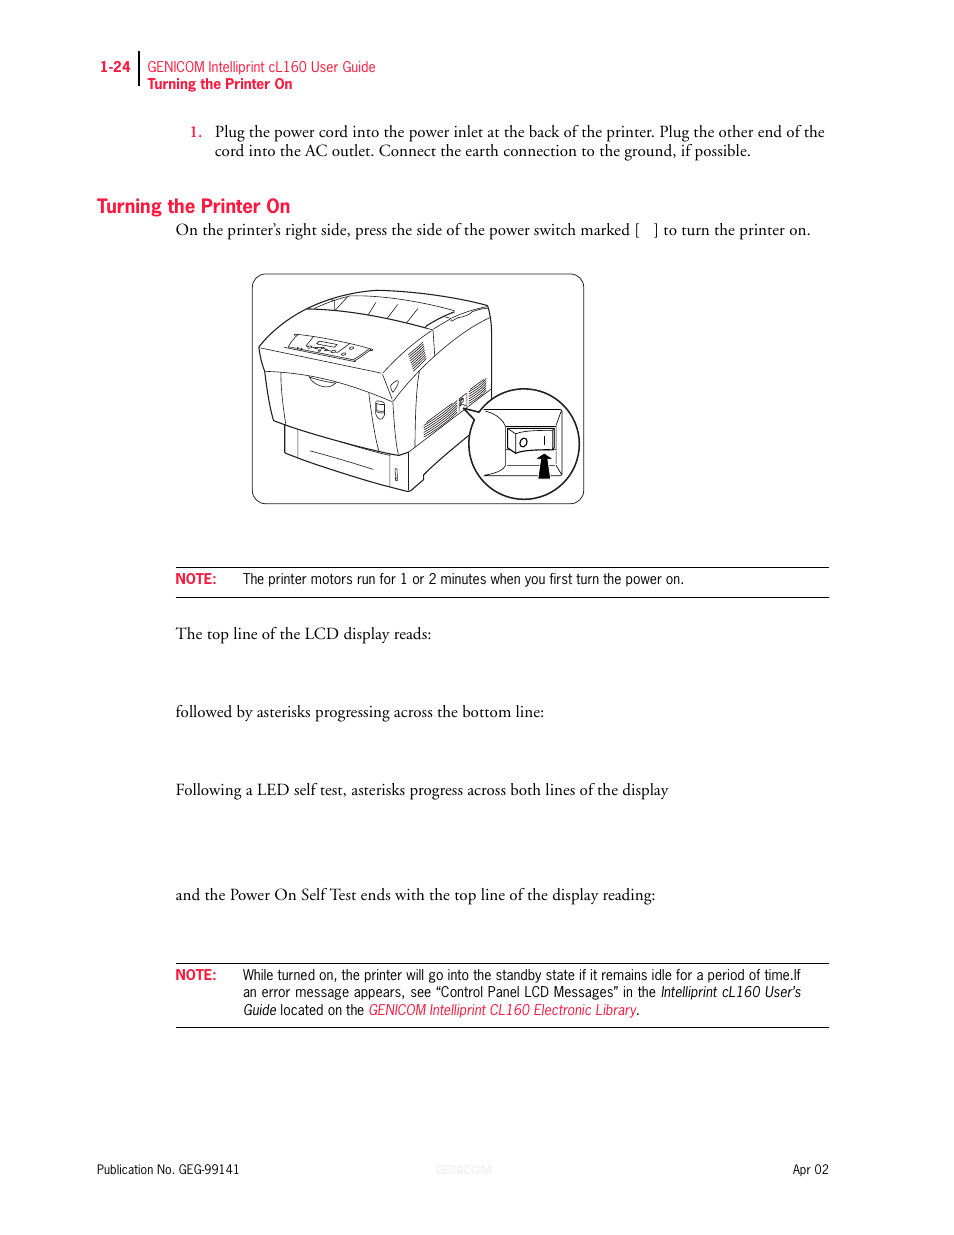 Turning the printer on, Turning the printer on 1-24 | Genicom cL160 User Manual | Page 44 / 216